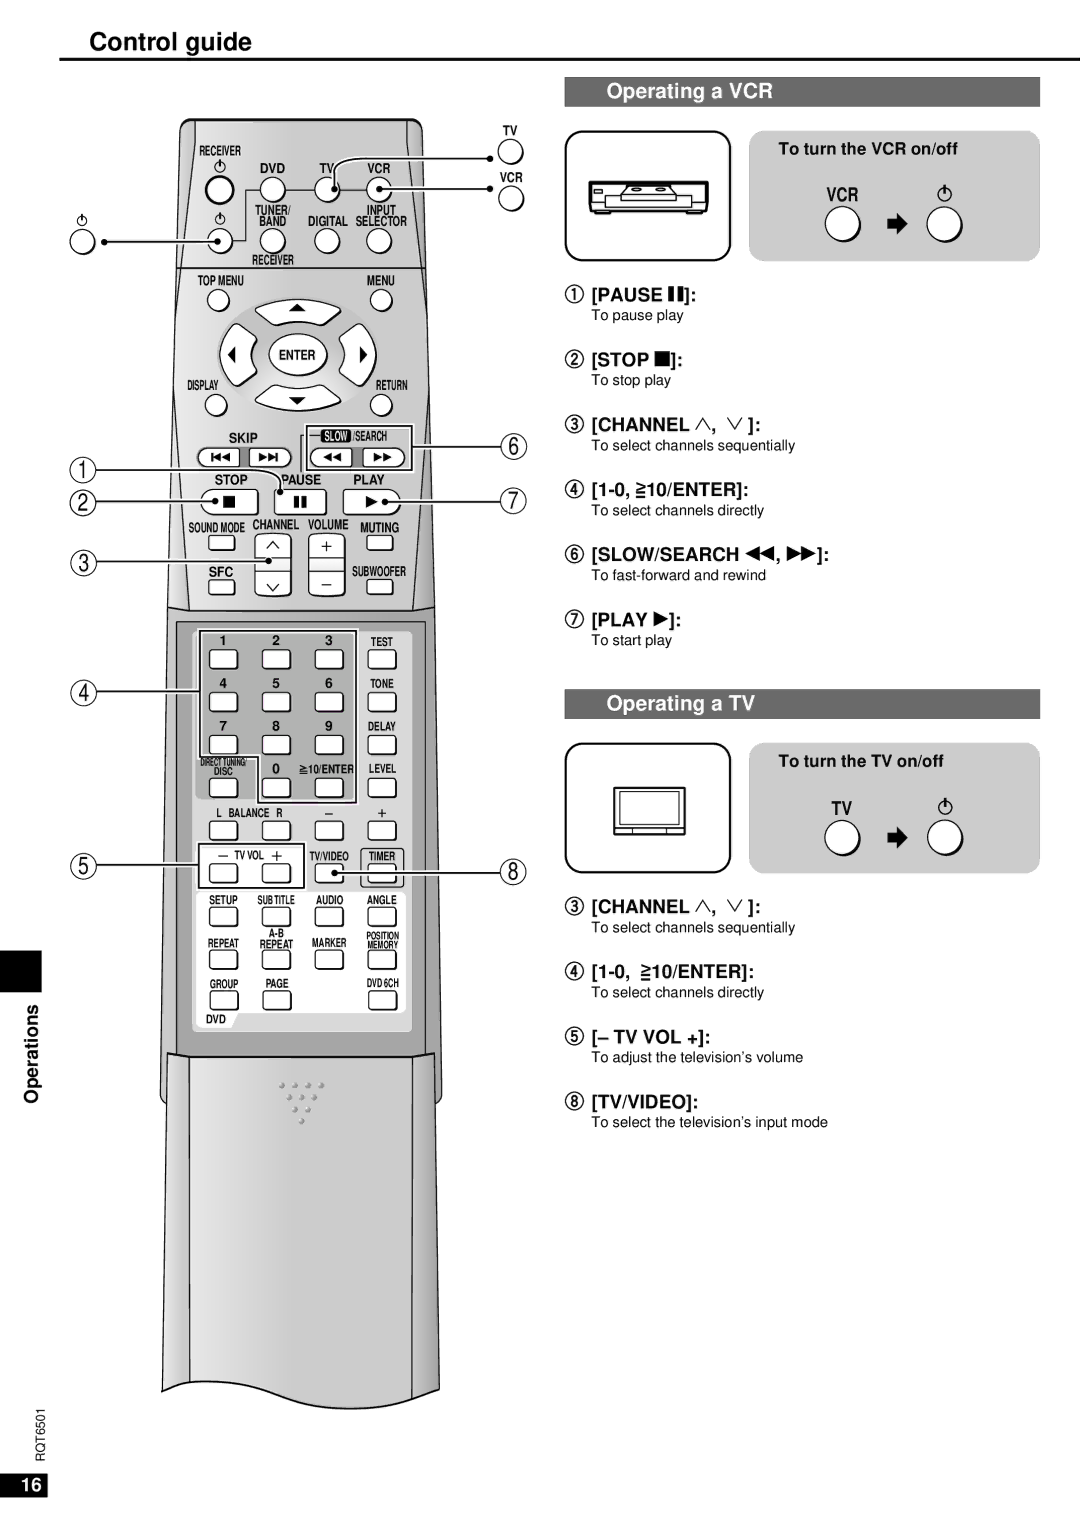 Panasonic SA-XR10 specifications Operating a VCR, Operating a TV 